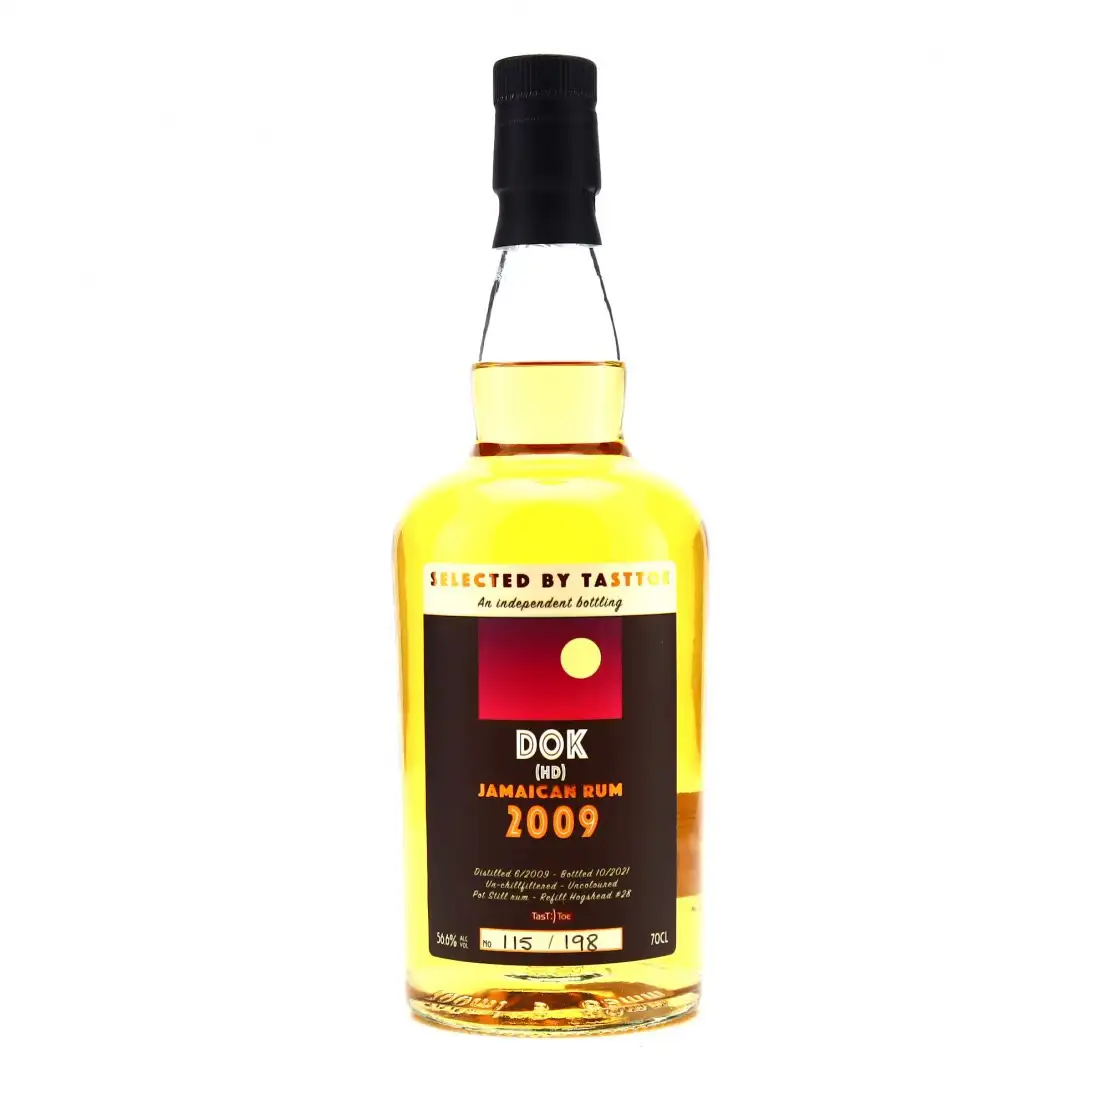 Image of the front of the bottle of the rum HD DOK